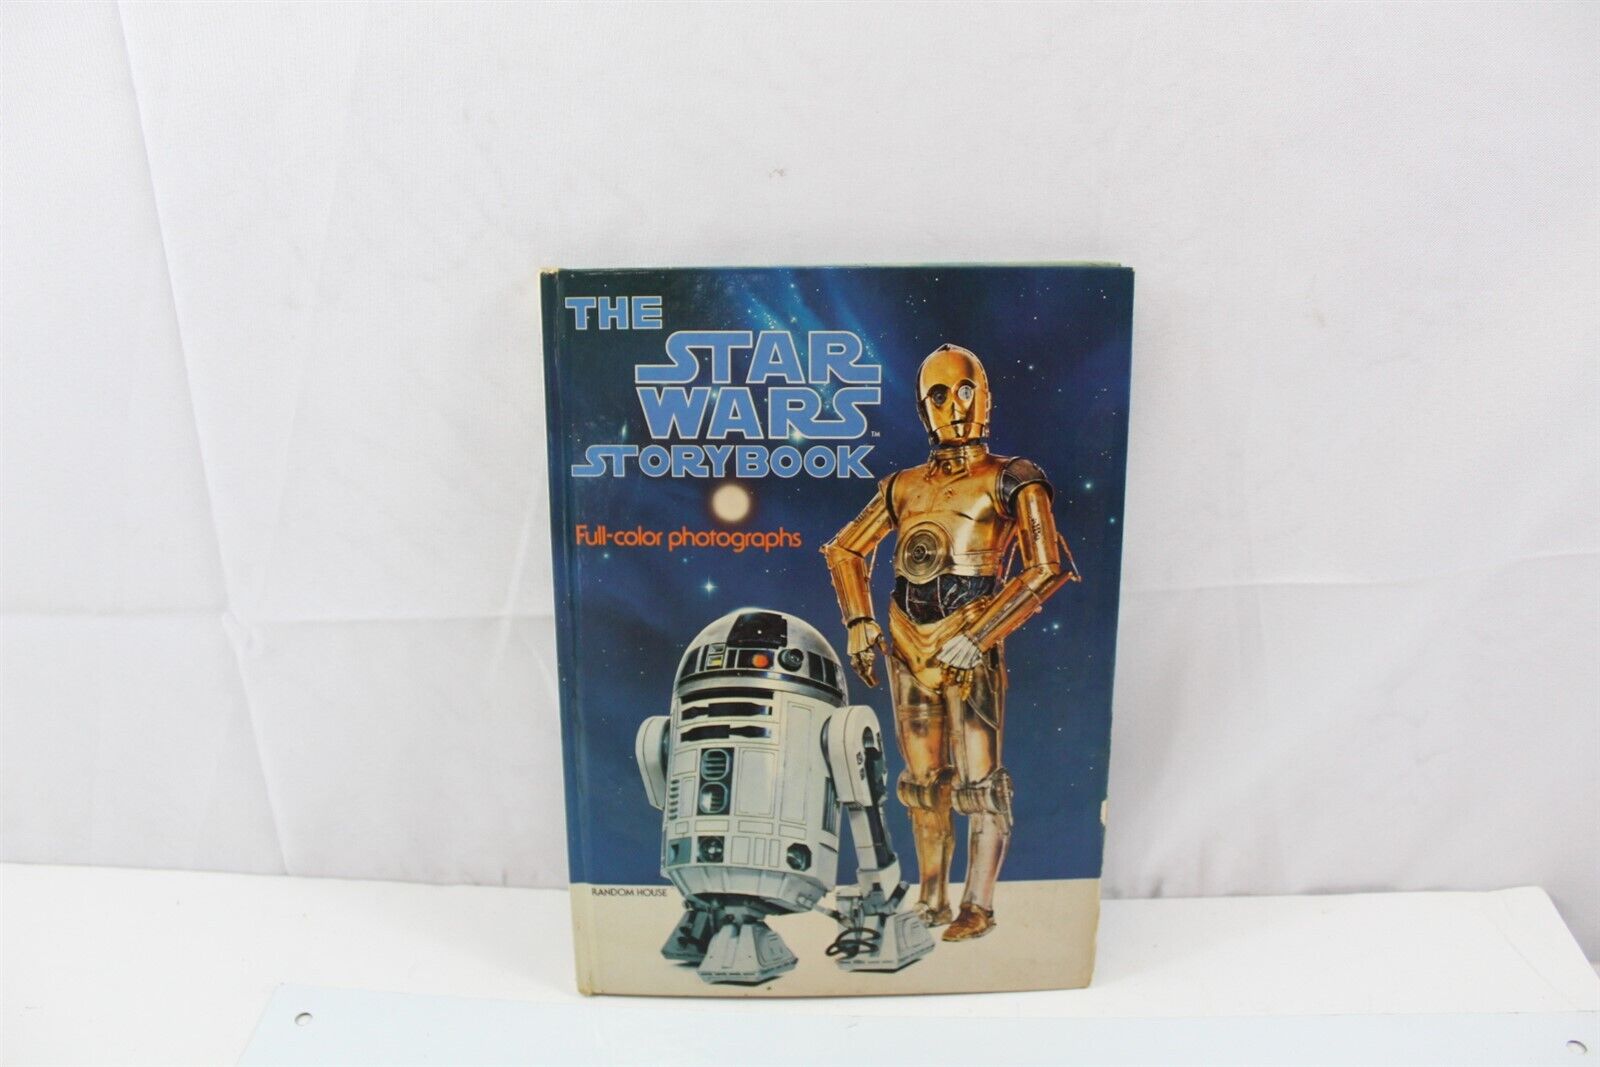 Vintage 1978 Hardcover Book Collectible Star Wars Storybook Full Color Photos